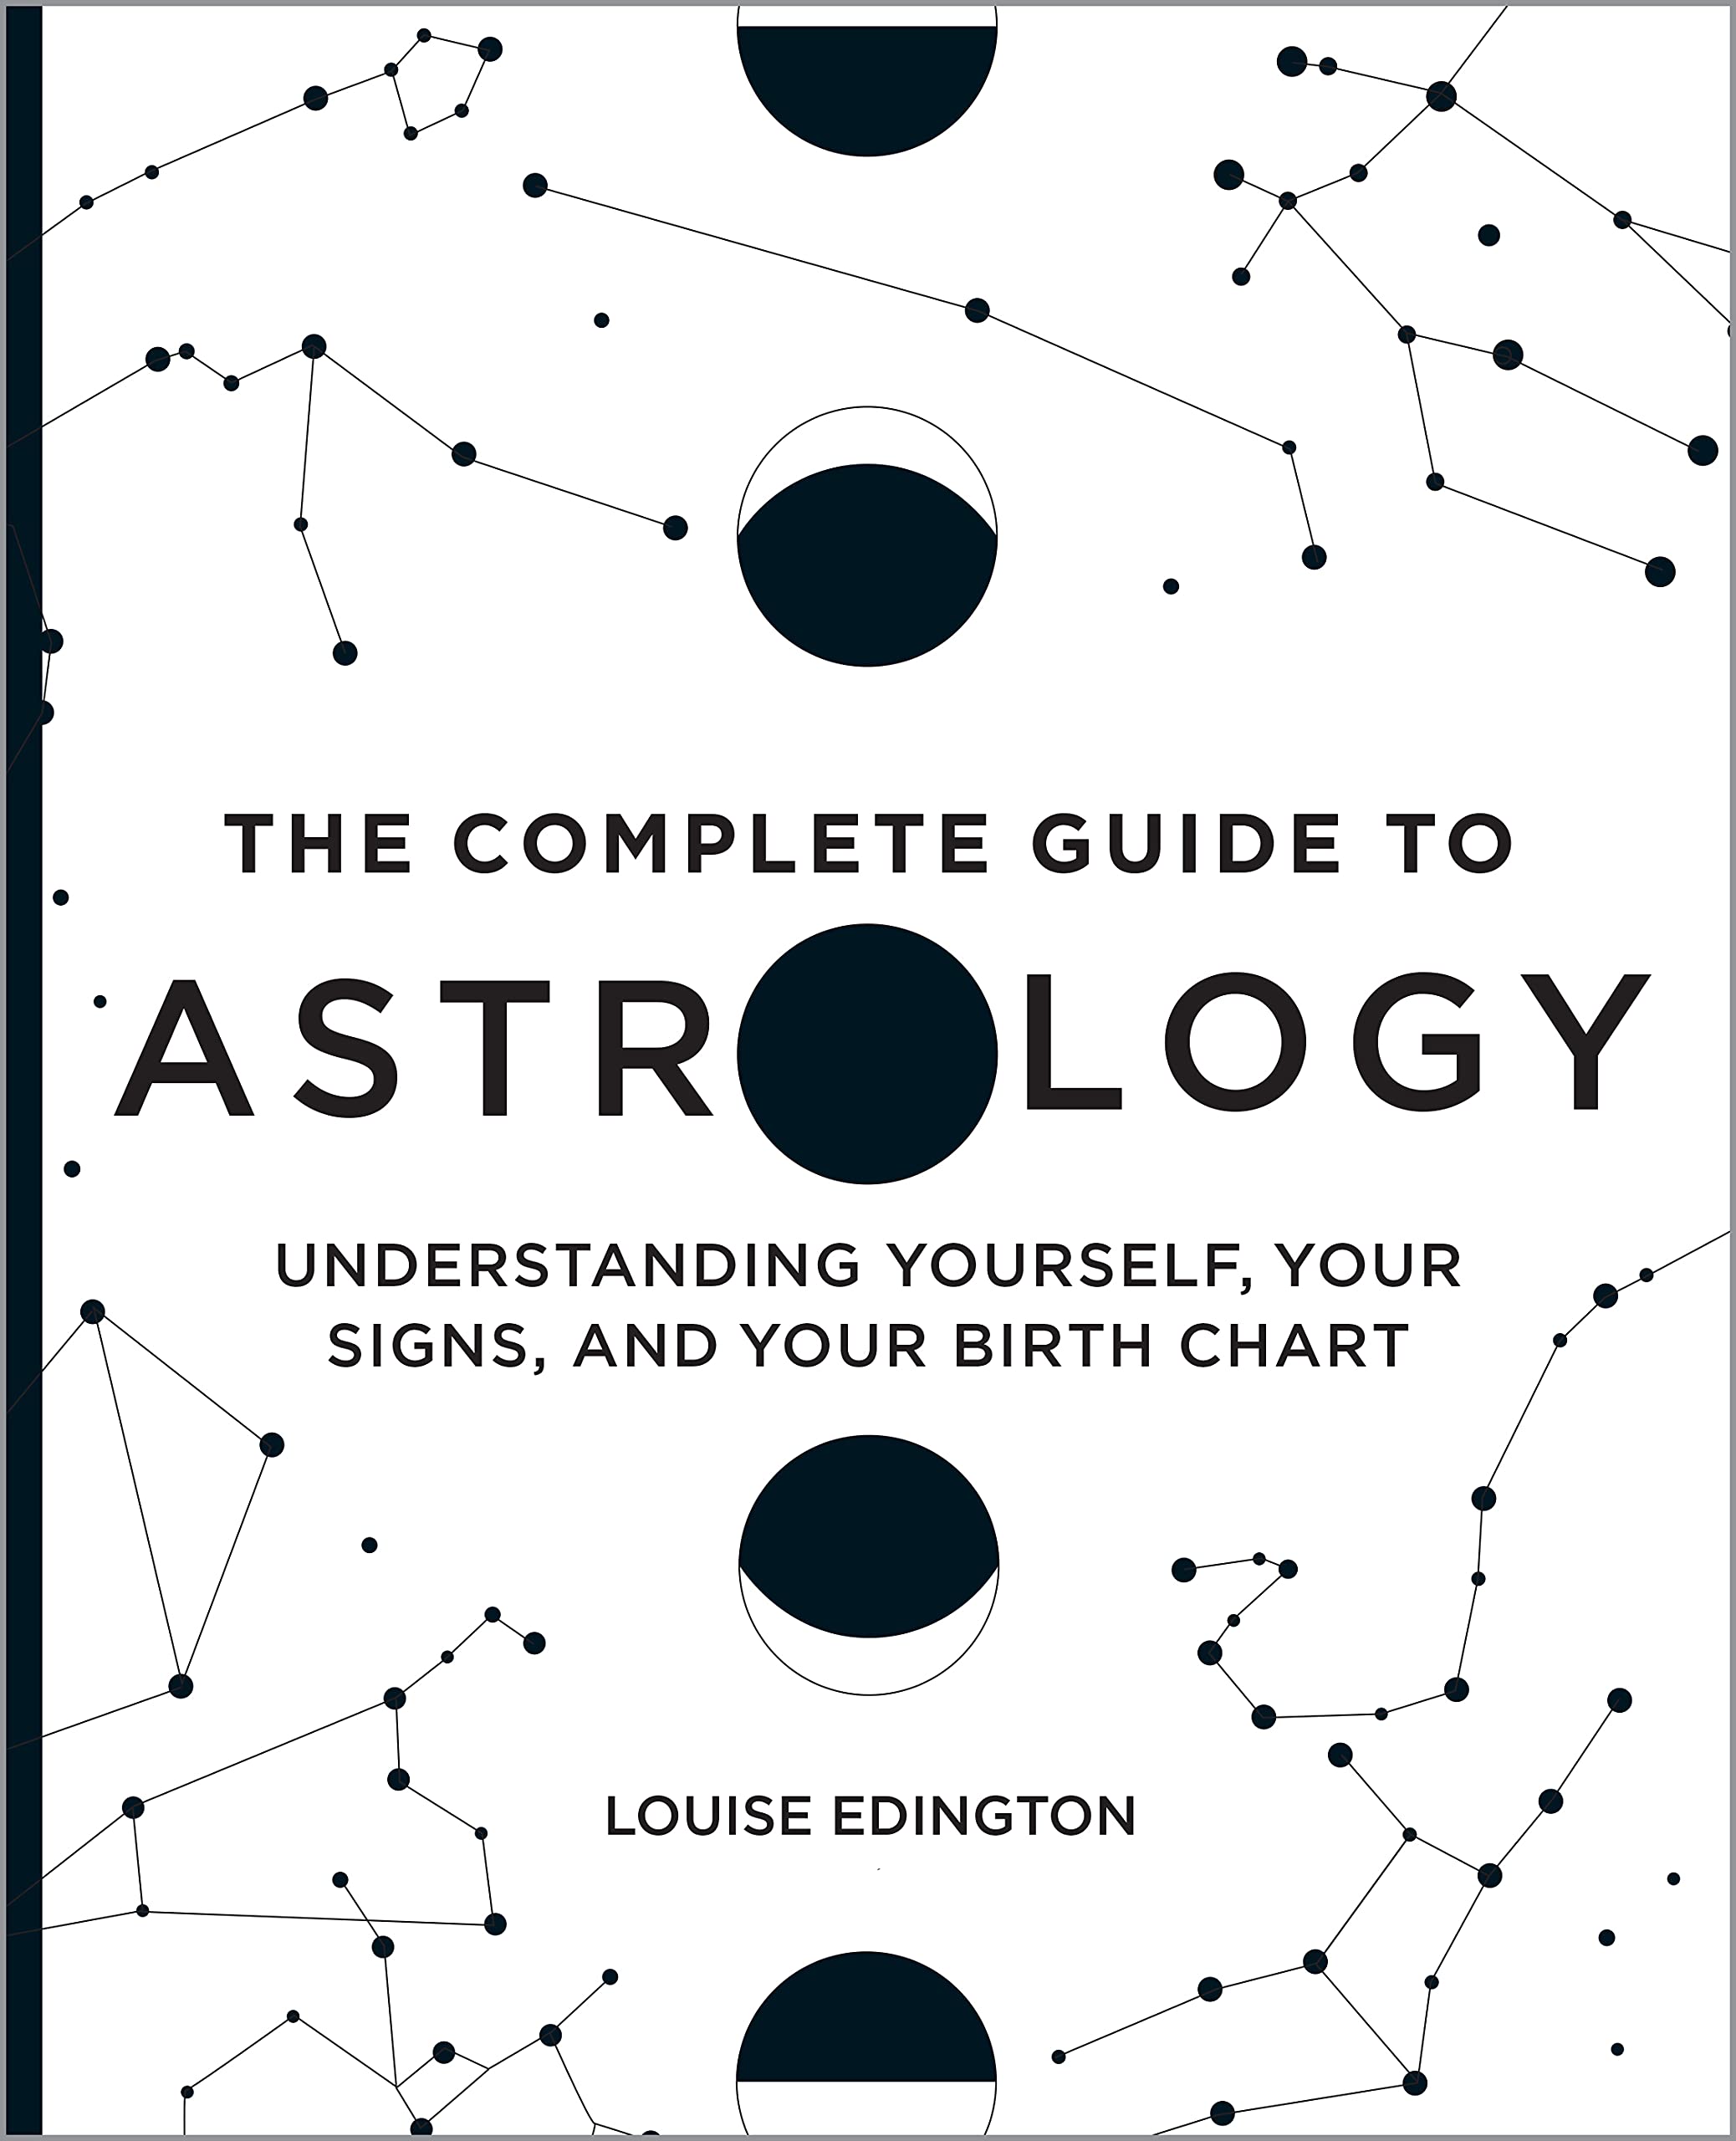 The Complete Guide to Astrology- Understanding Yourself, Your Signs, and Your Birth Chart